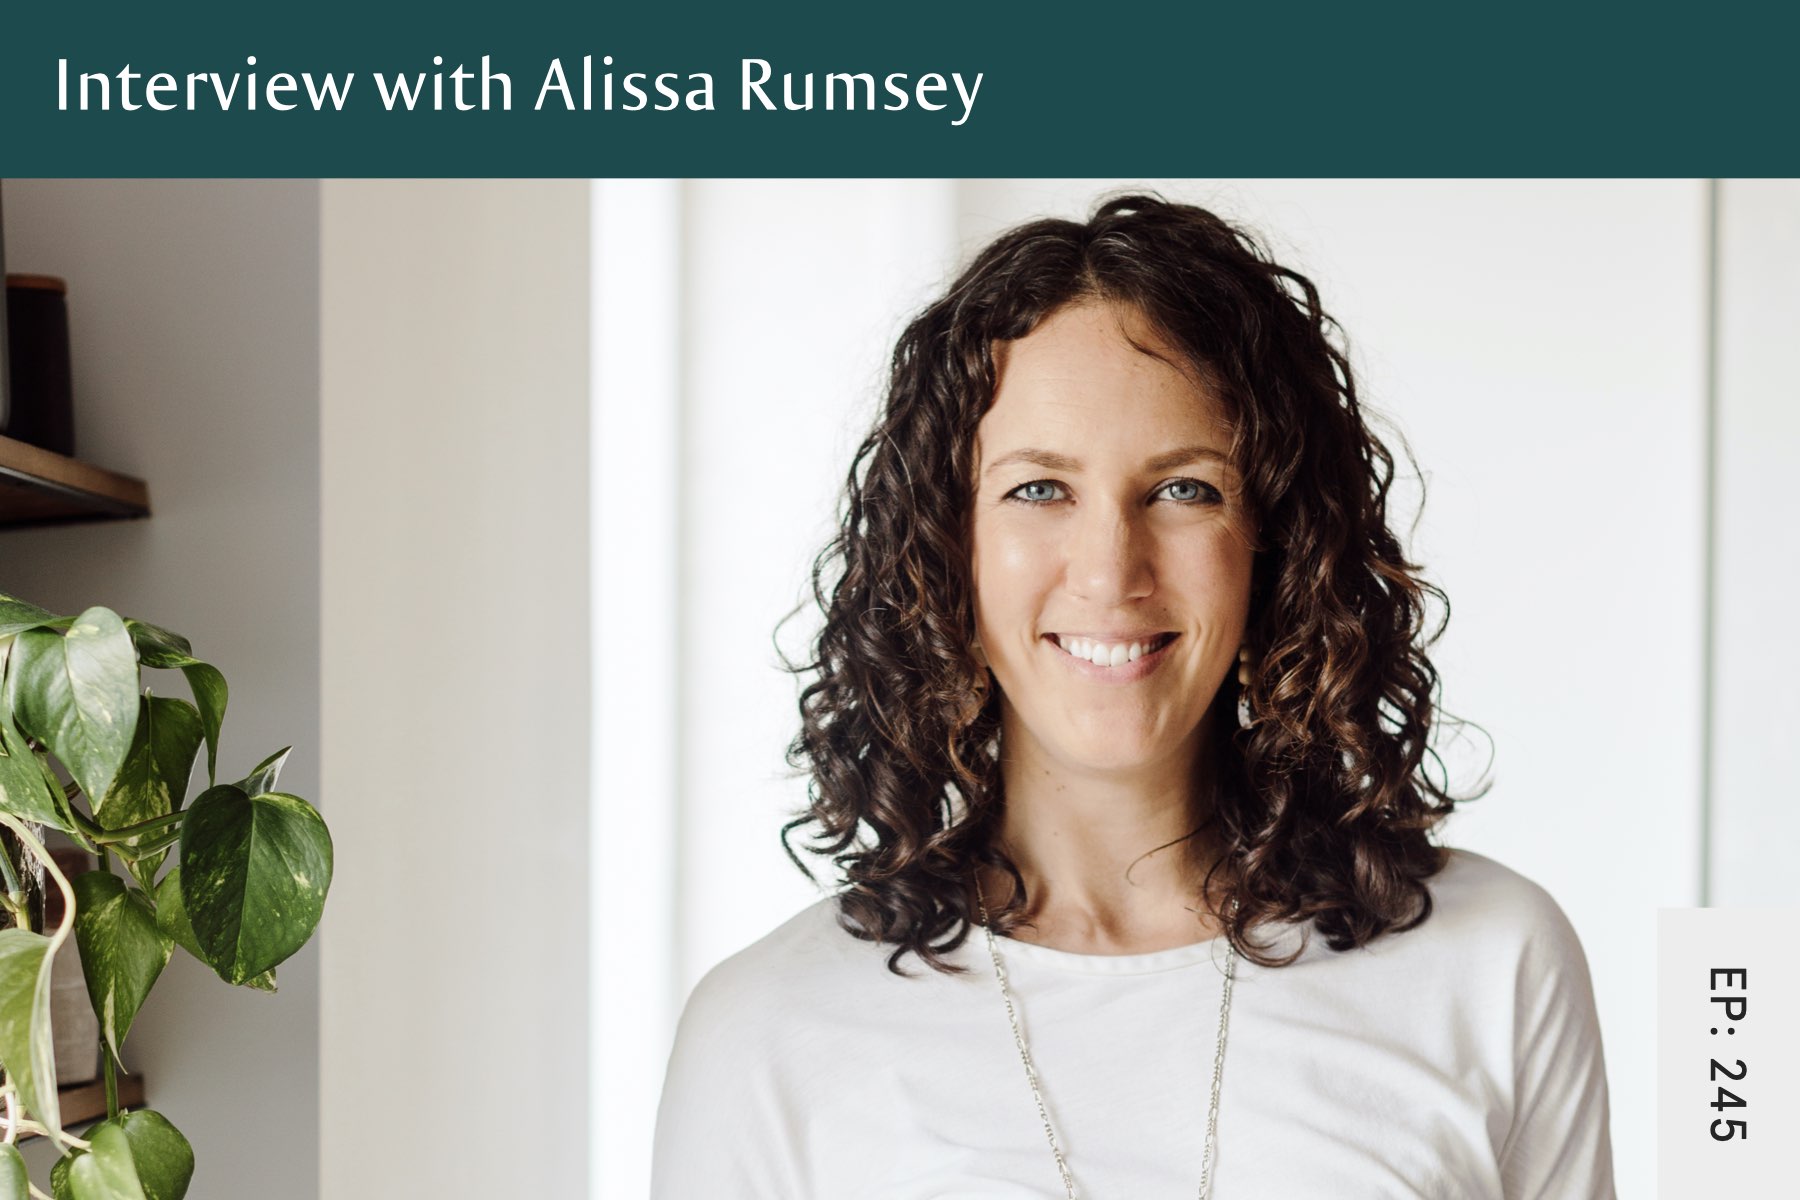 245: Unapologetic Eating, Beauty Ideals, Body Grief and Self-Connection with Alissa Rumsey - Seven Health: Eating Disorder Recovery and Anti Diet Nutritionist